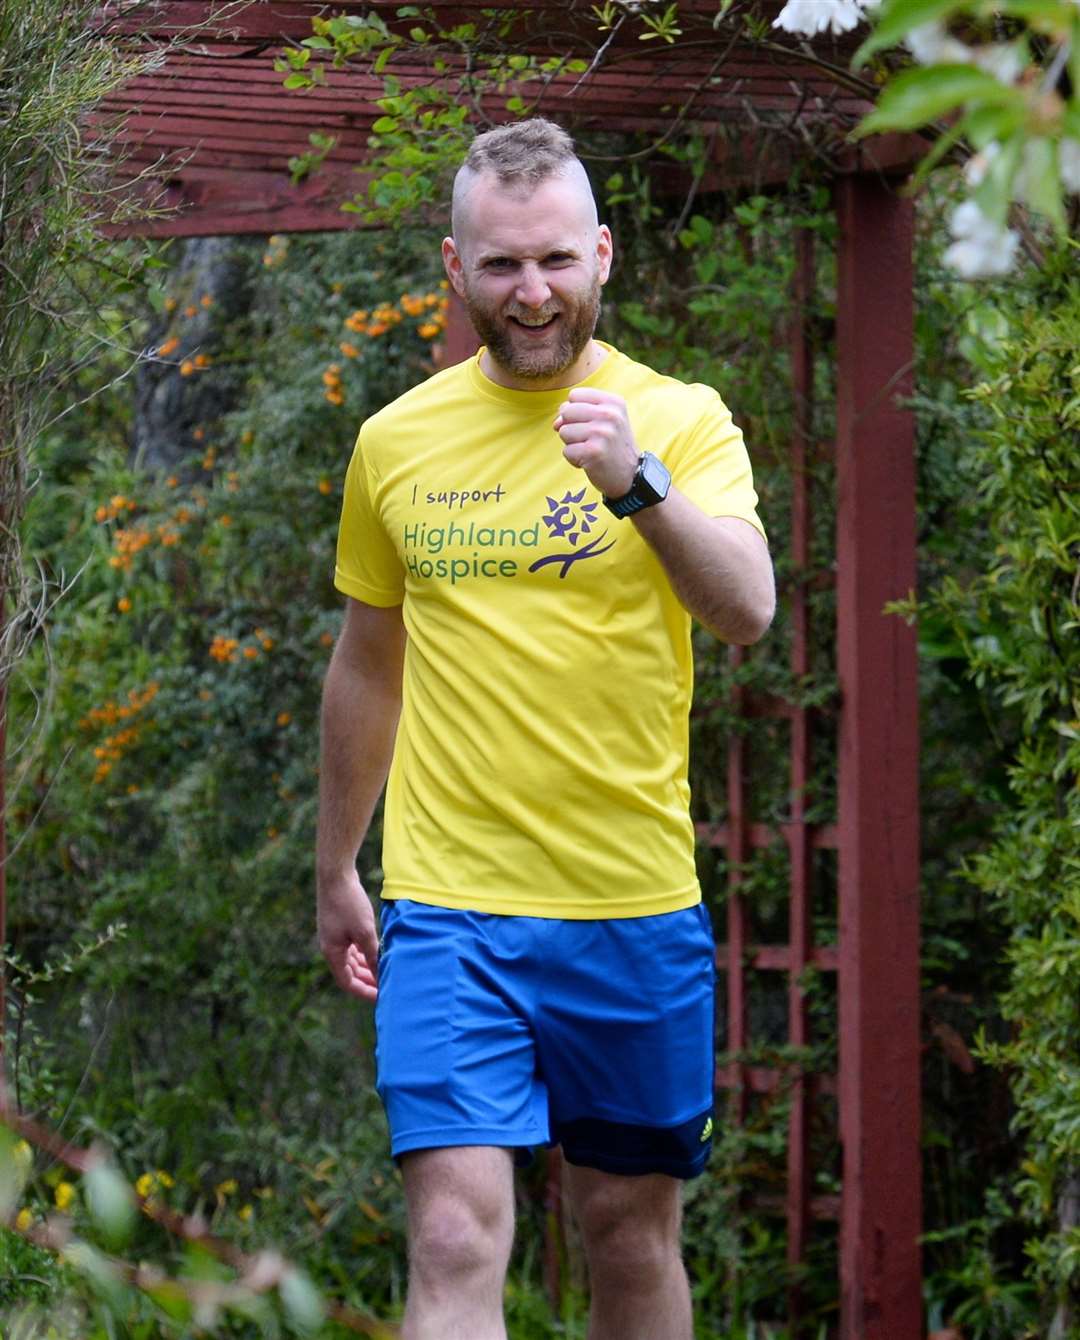 Calum Maclean walked round his garden for 24 hours to raise money for Highland Hospice.